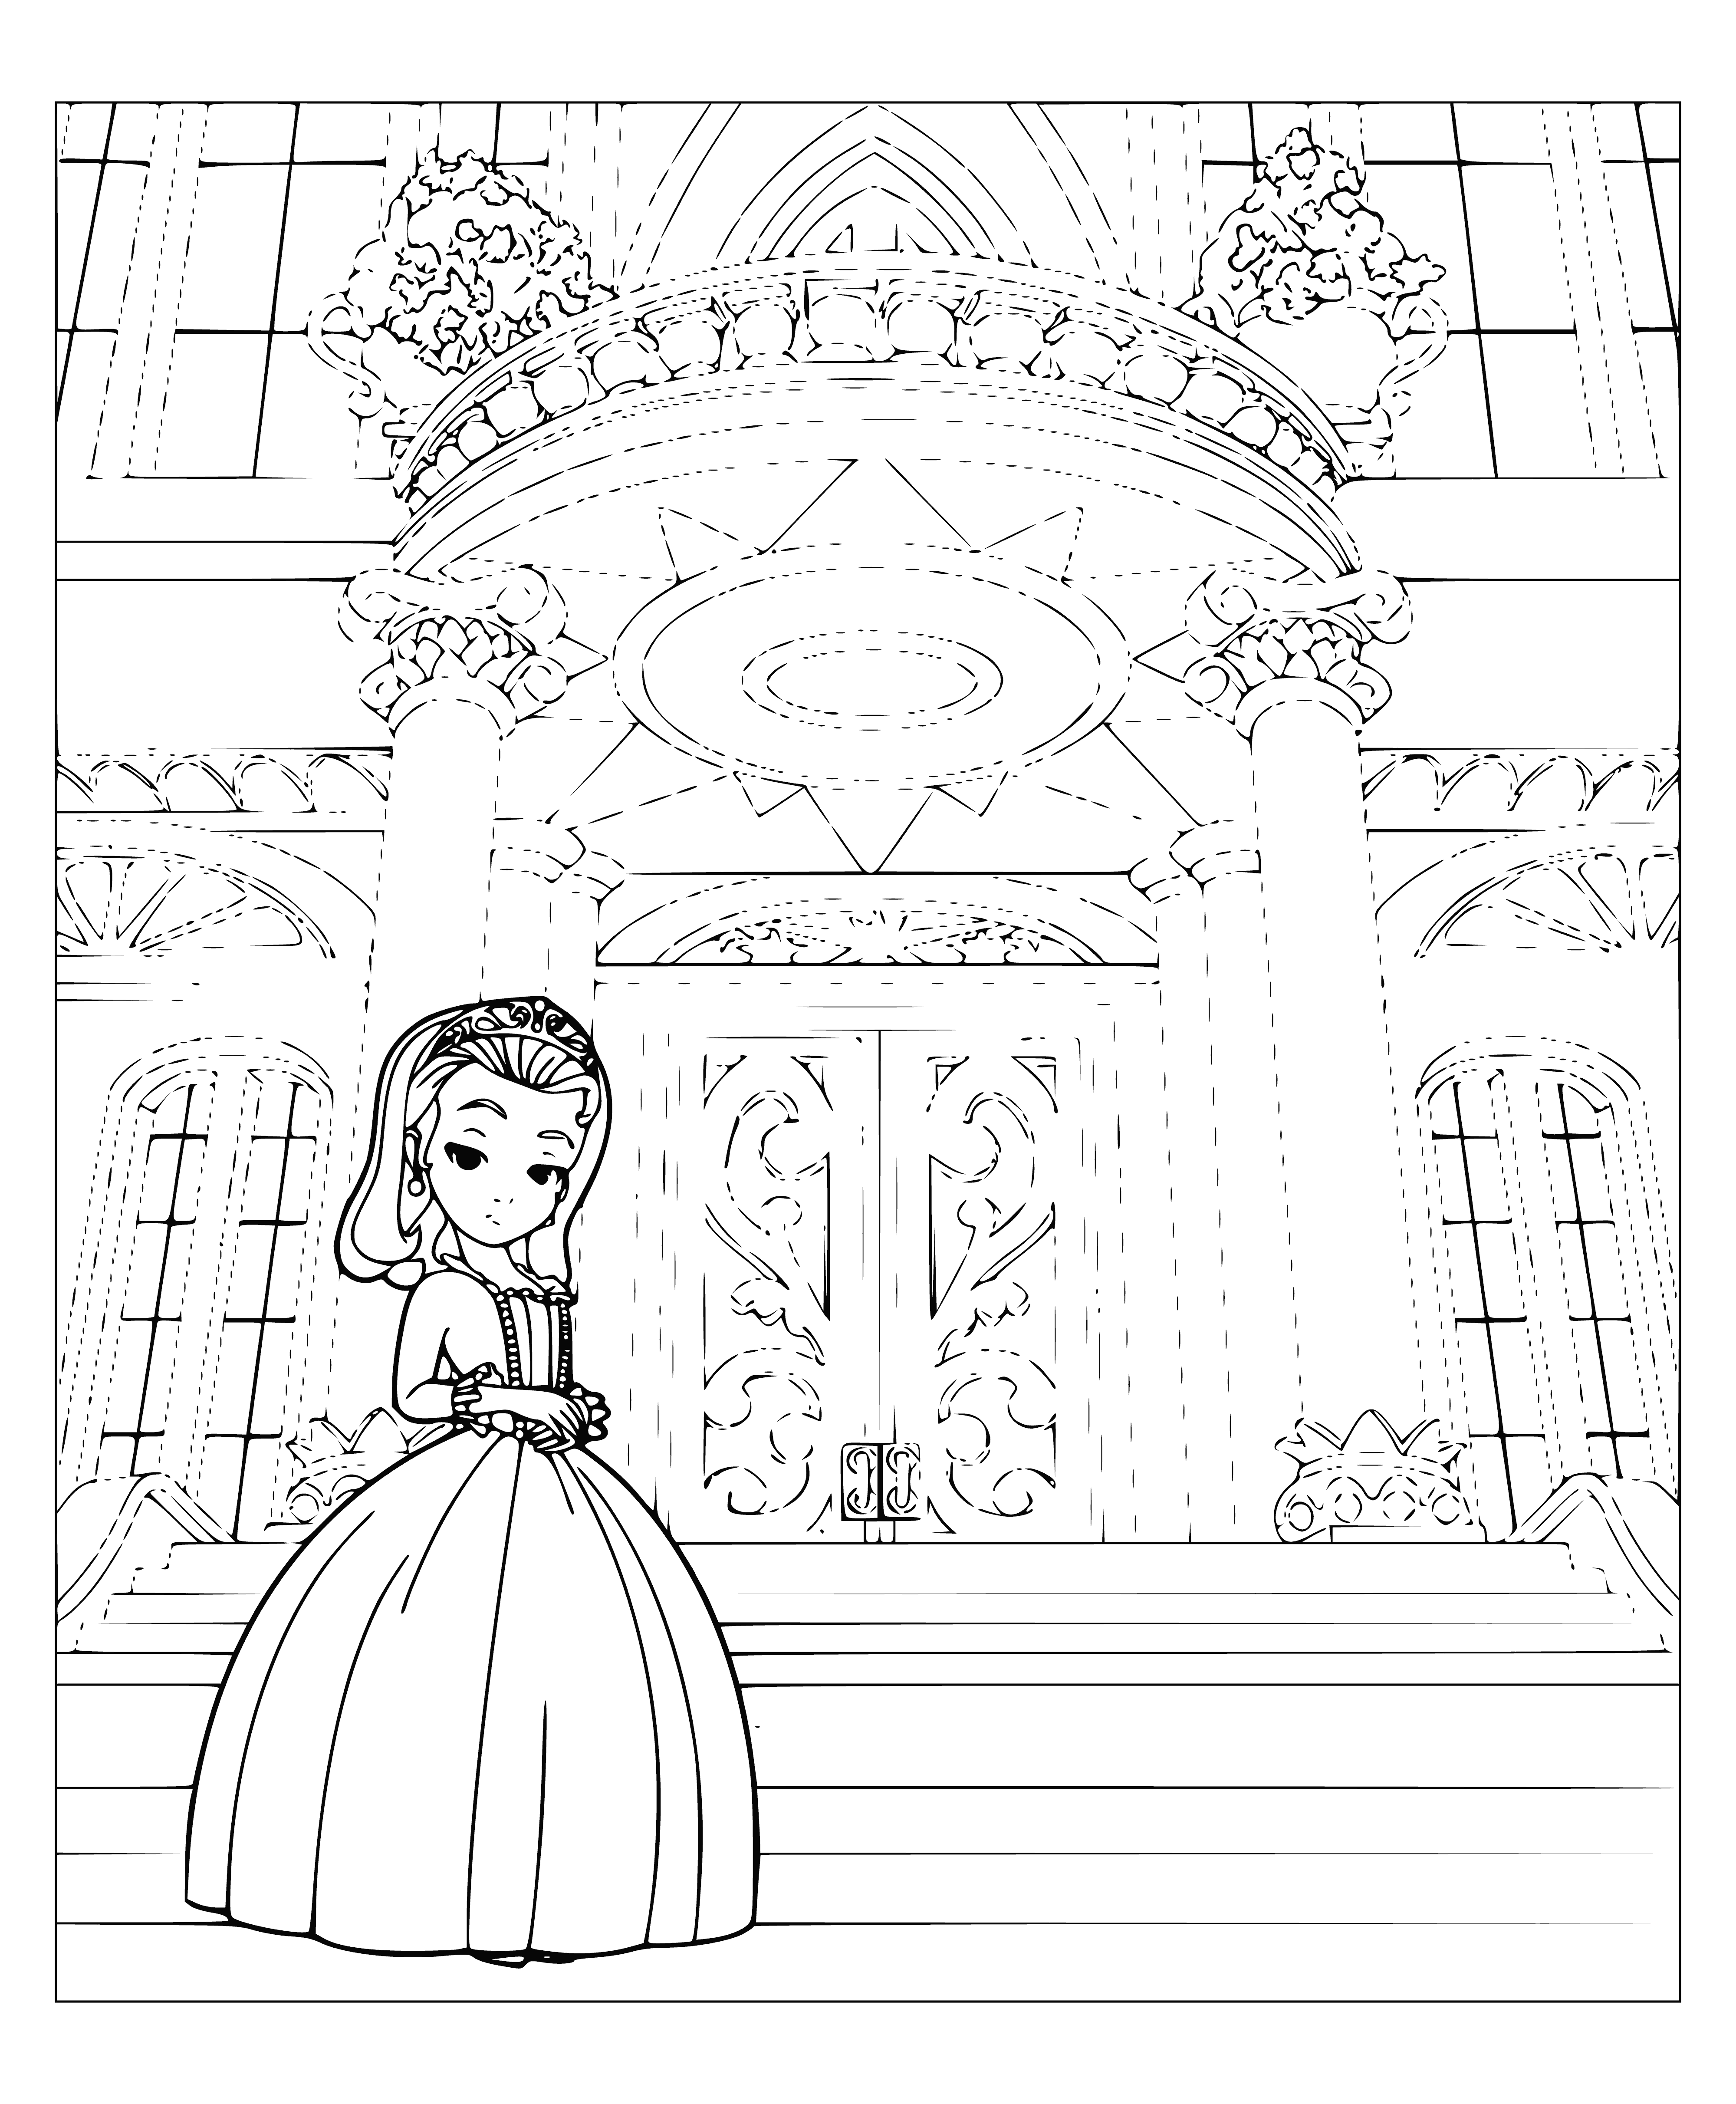 coloring page: Sofia & Princess Amber hug, wearing stunning dresses: Sofia in pink with tiara, Amber in orange with golden necklace.